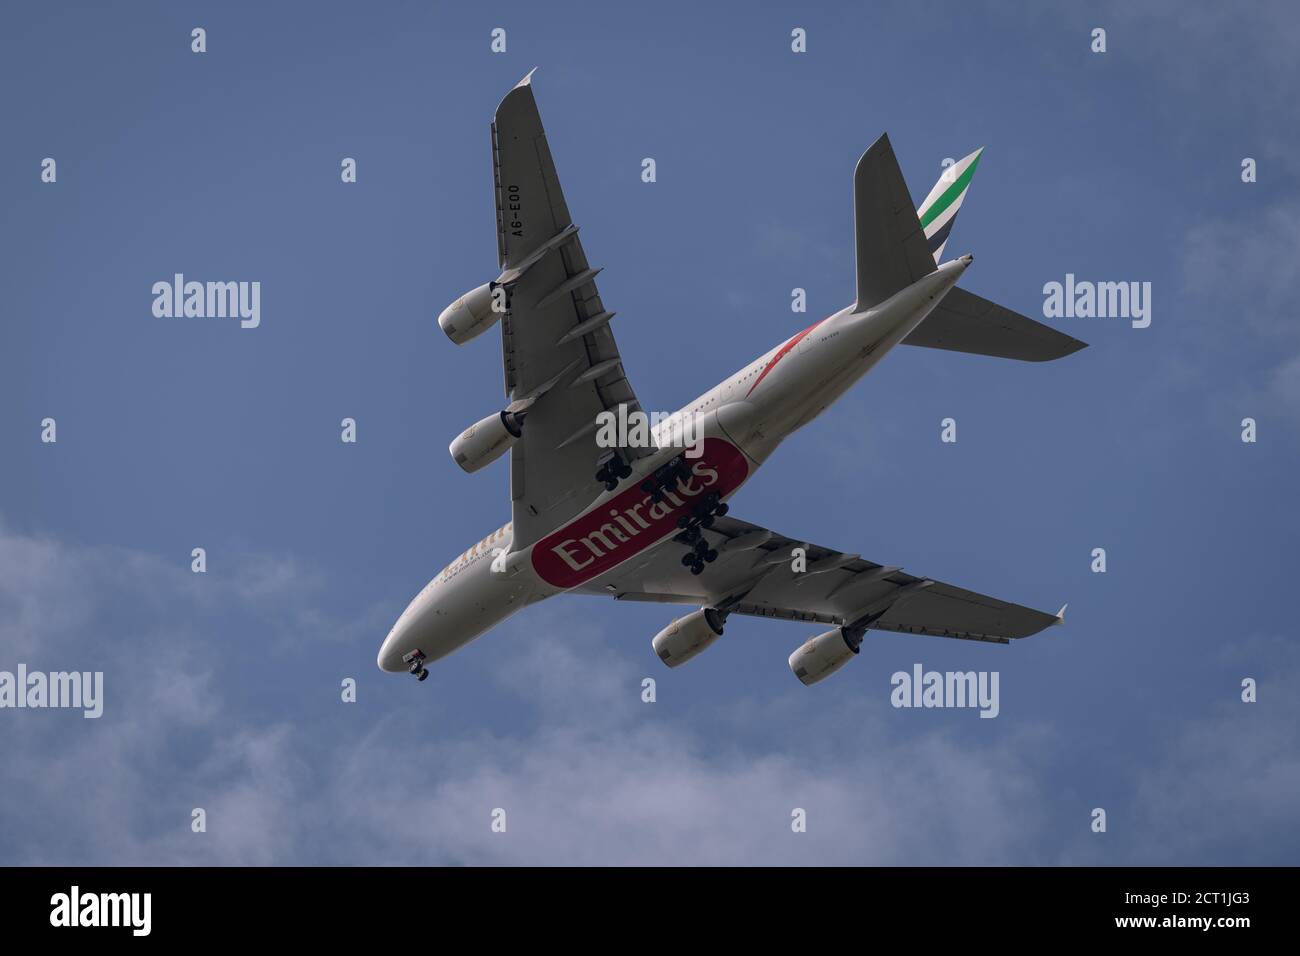 Emirates A380 approaching Heathrow airport in London, United Kingdom Stock Photo